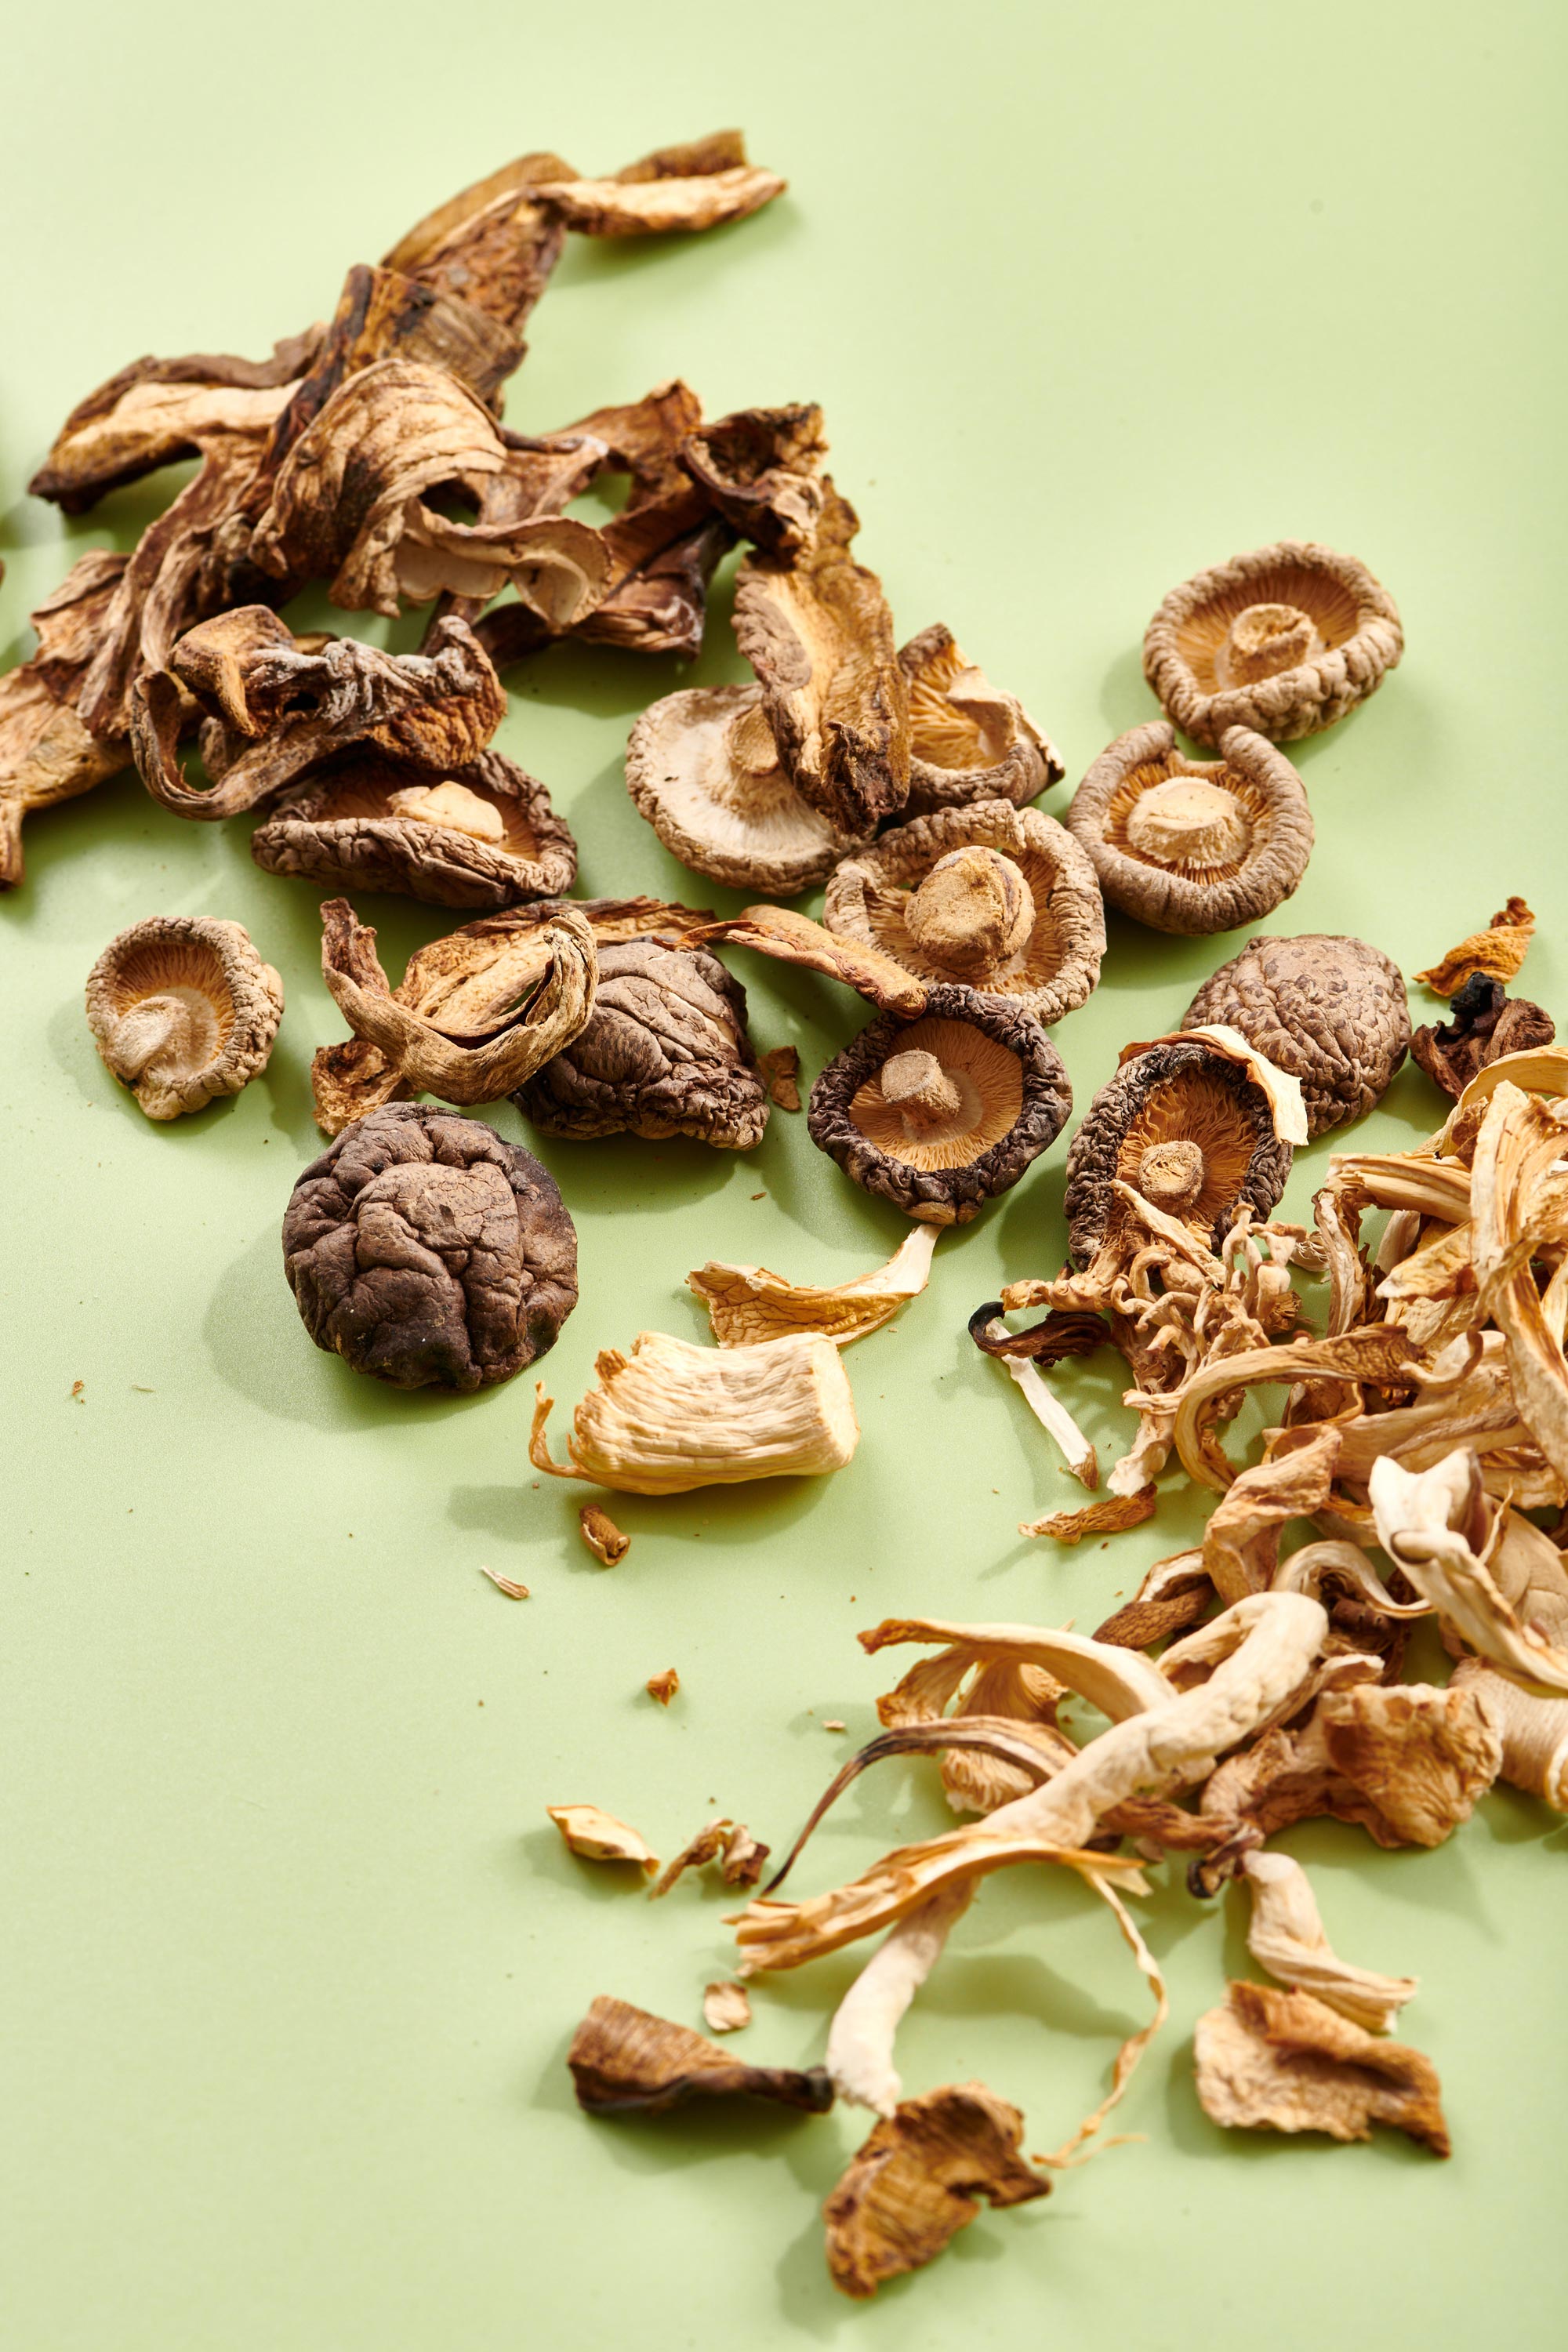 Various dried mushrooms on a pale green background.